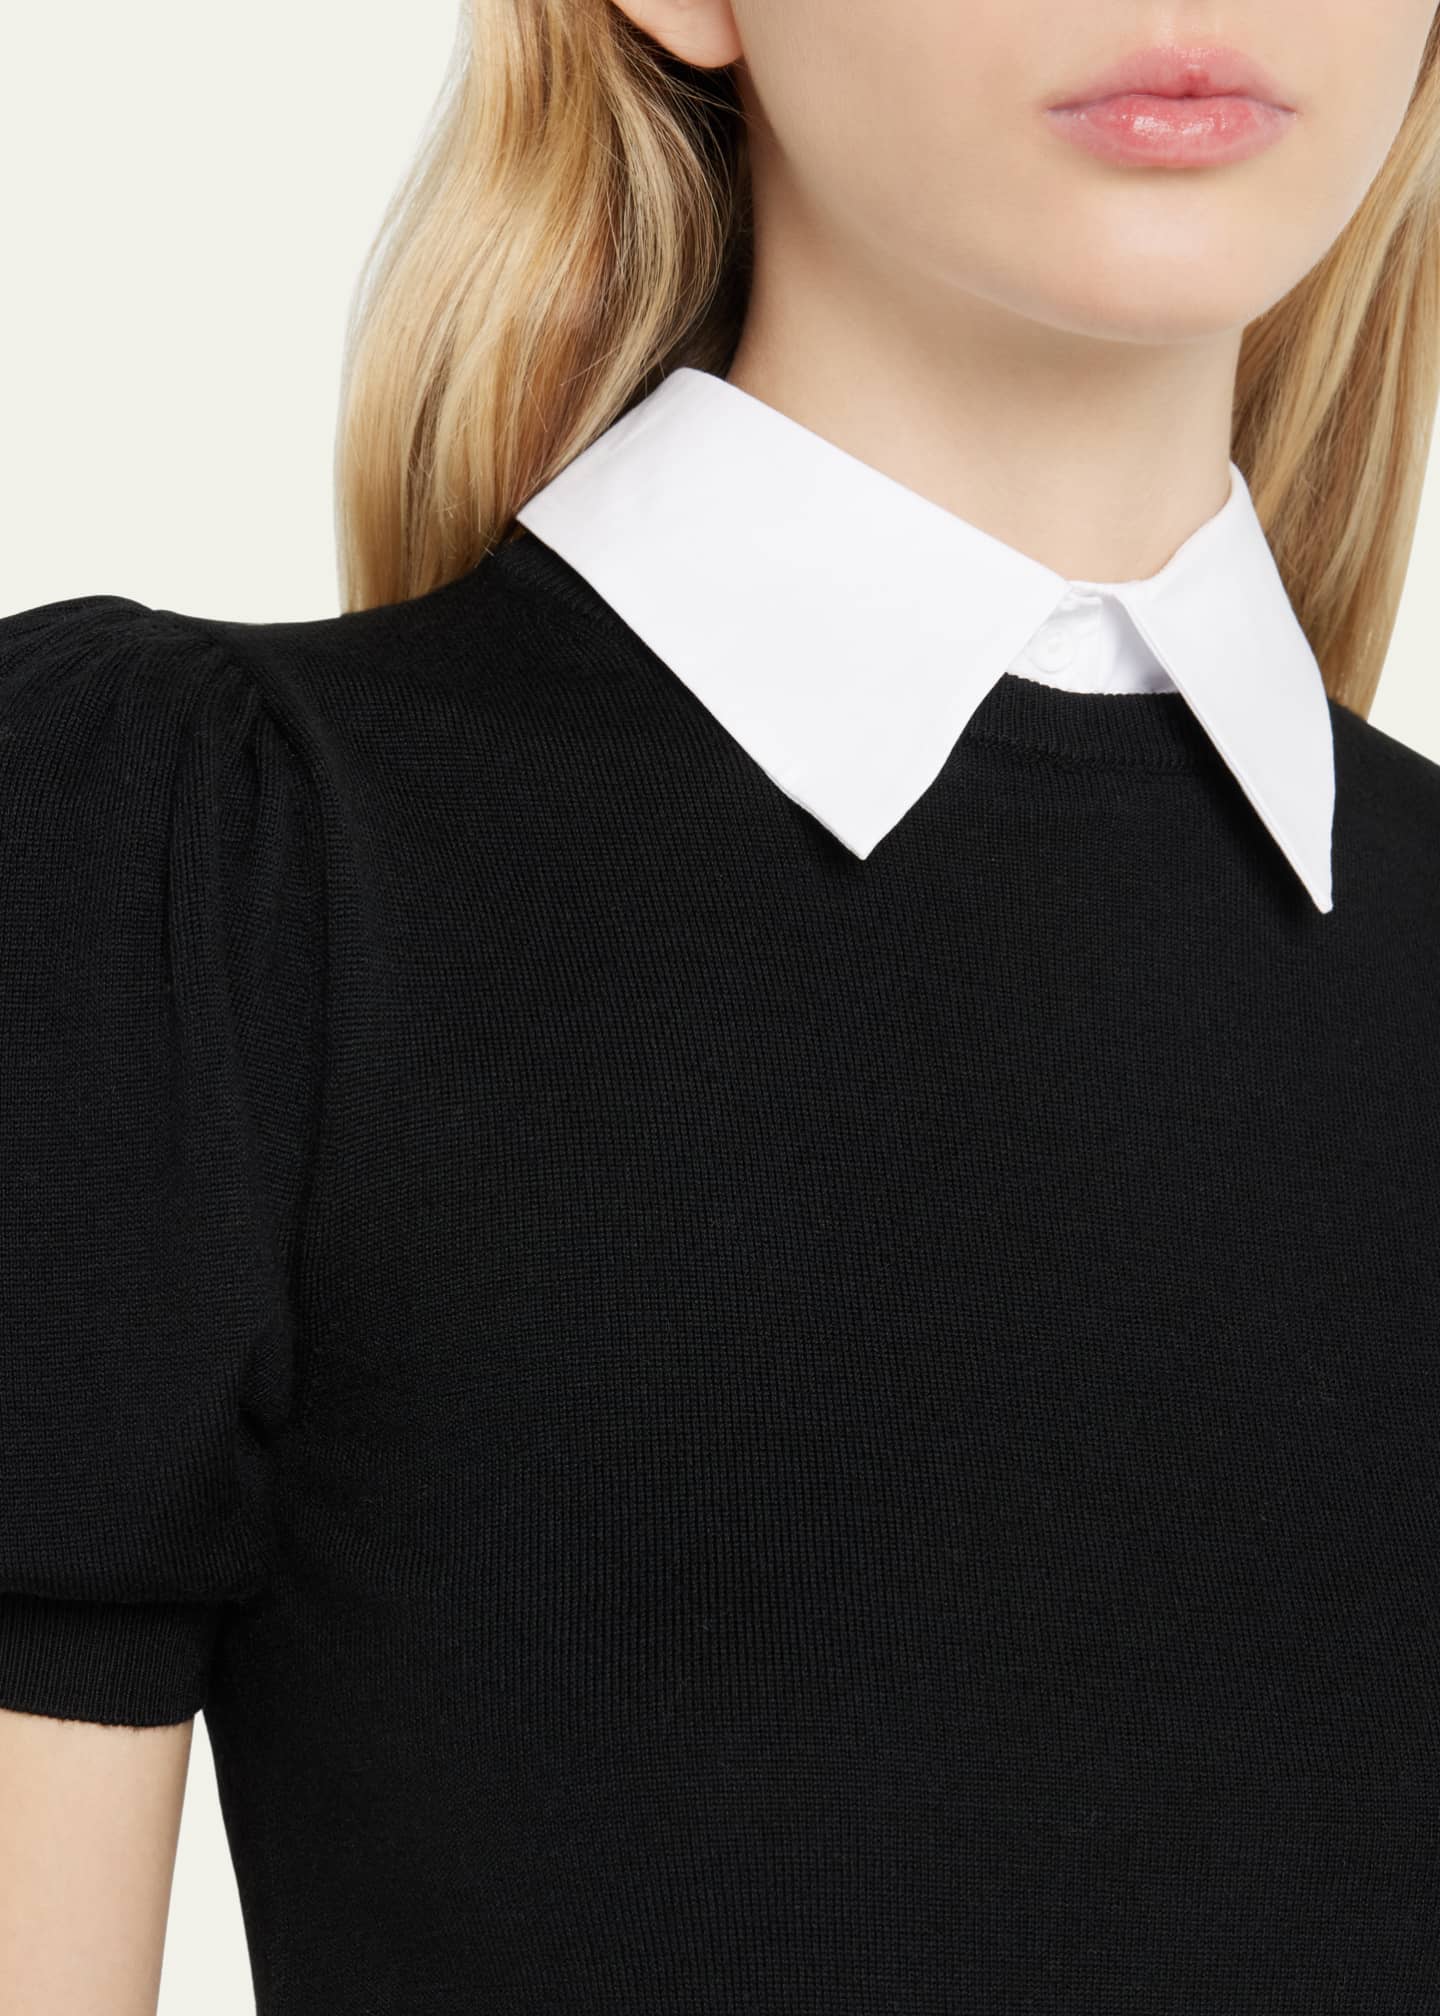 Alice + Olivia Chase Puff-Sleeve Sweater w/ Detachable Collar ...